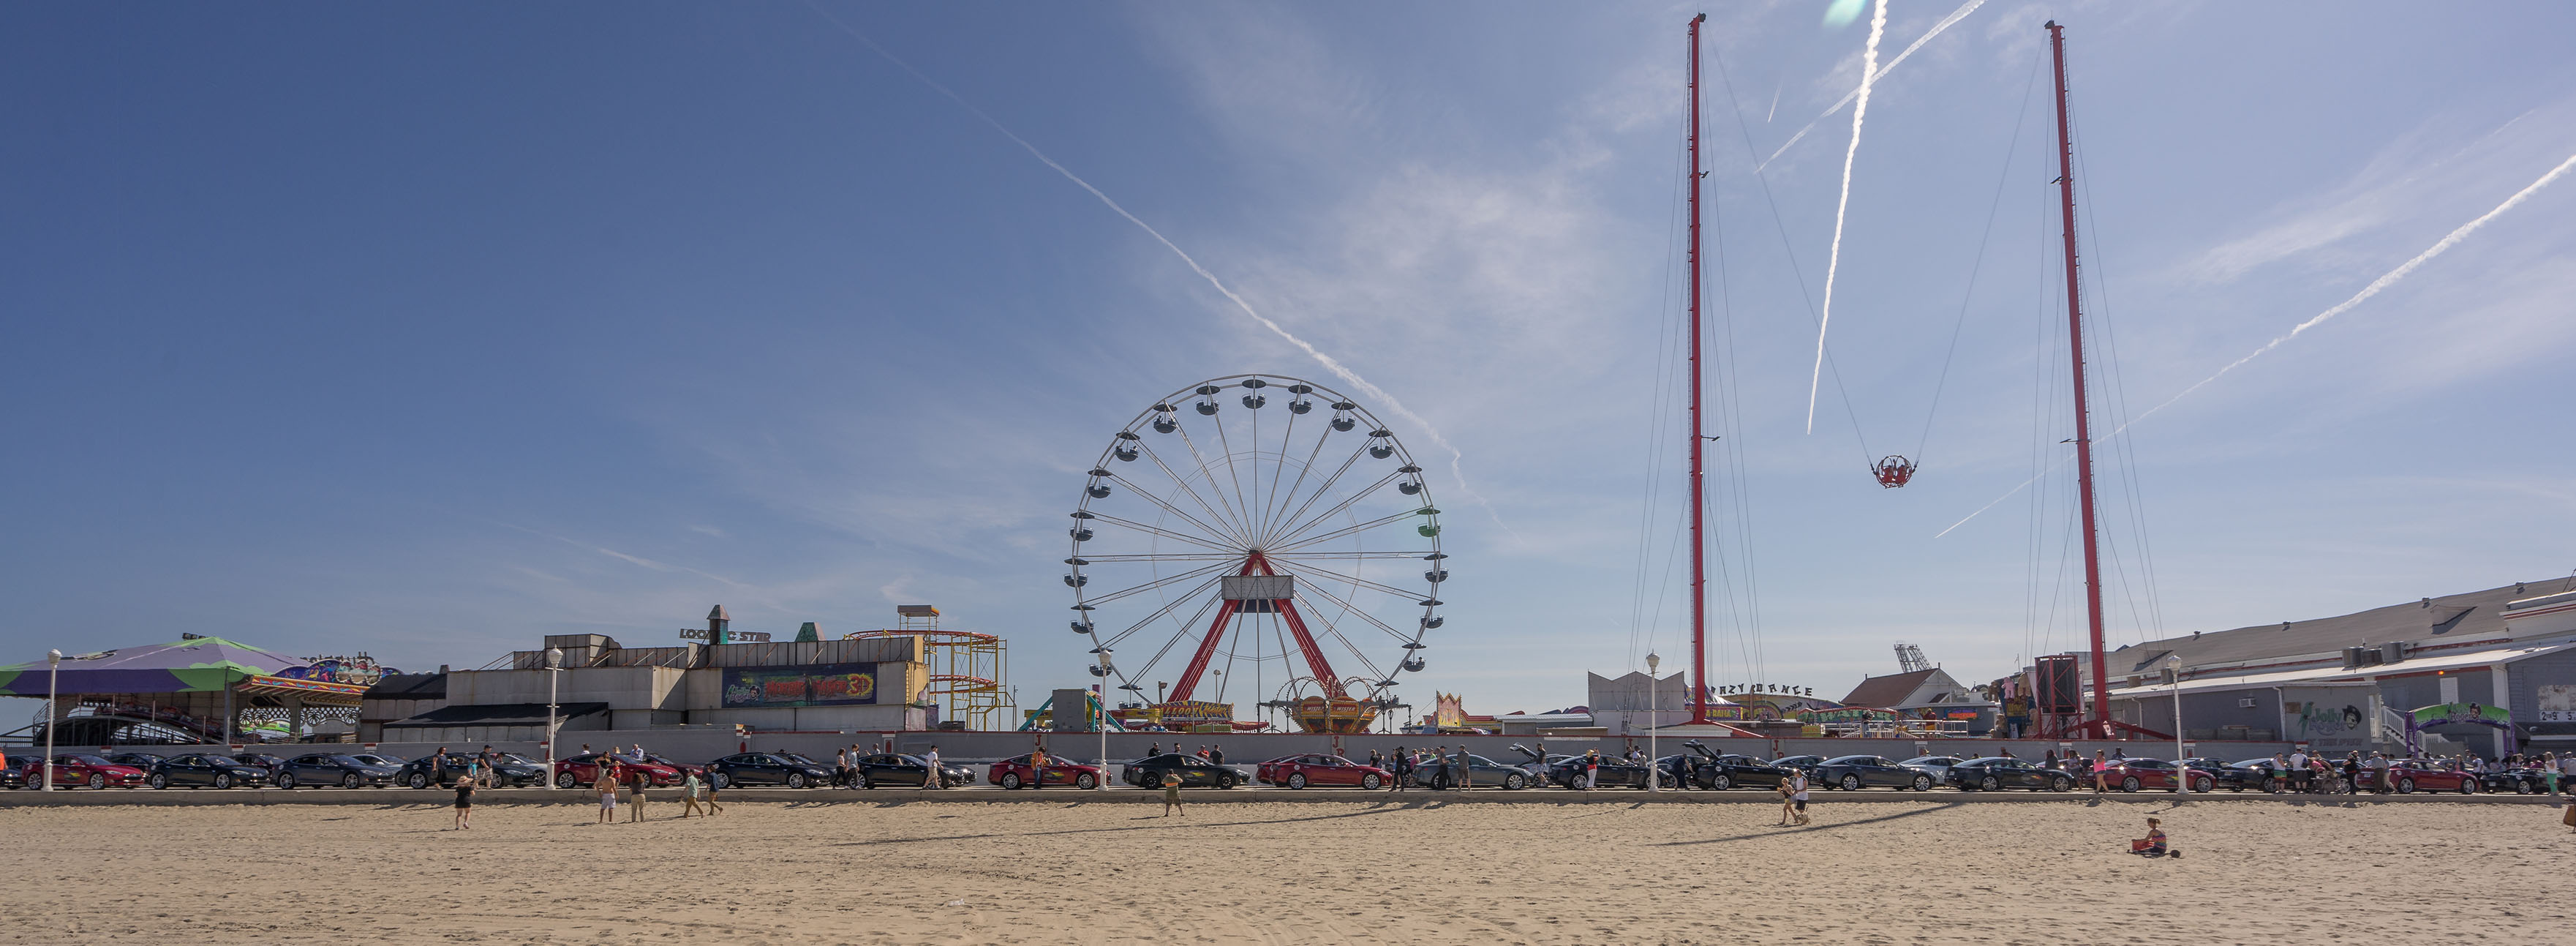 Pano of Tesla's lined up for the Boardwalk with Ferris Wheel.jpg